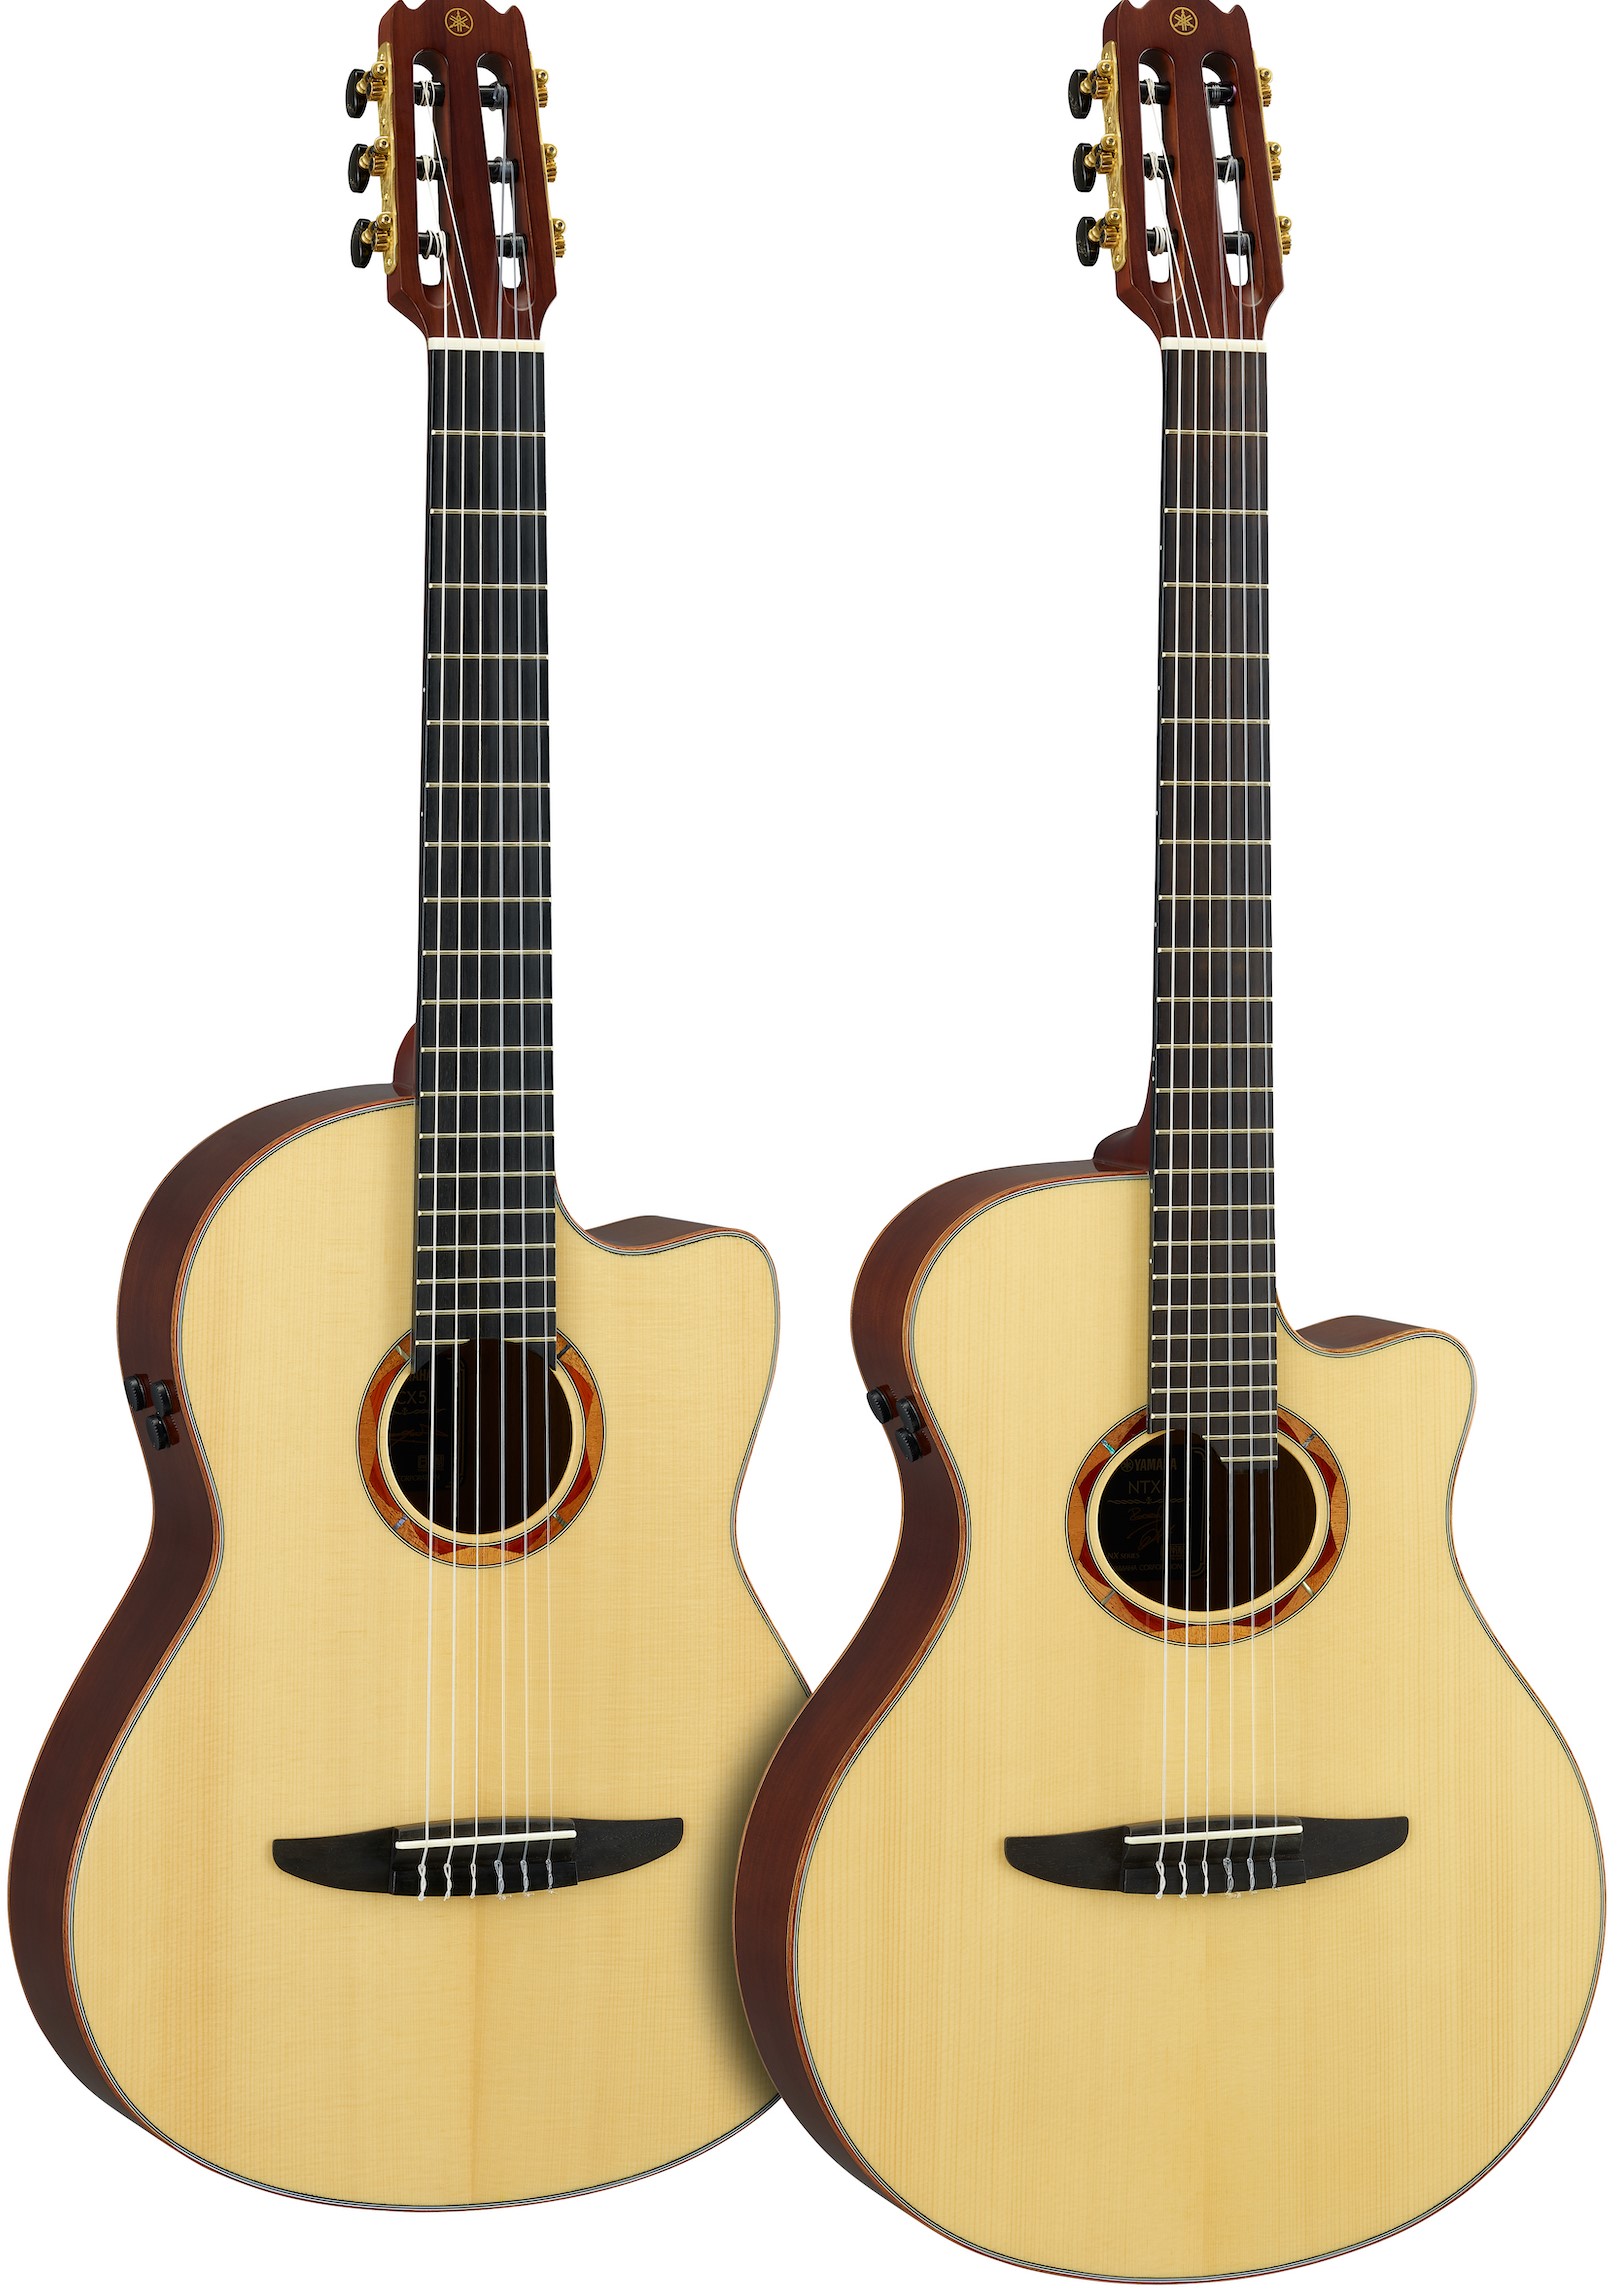 Two acoustic guitar.